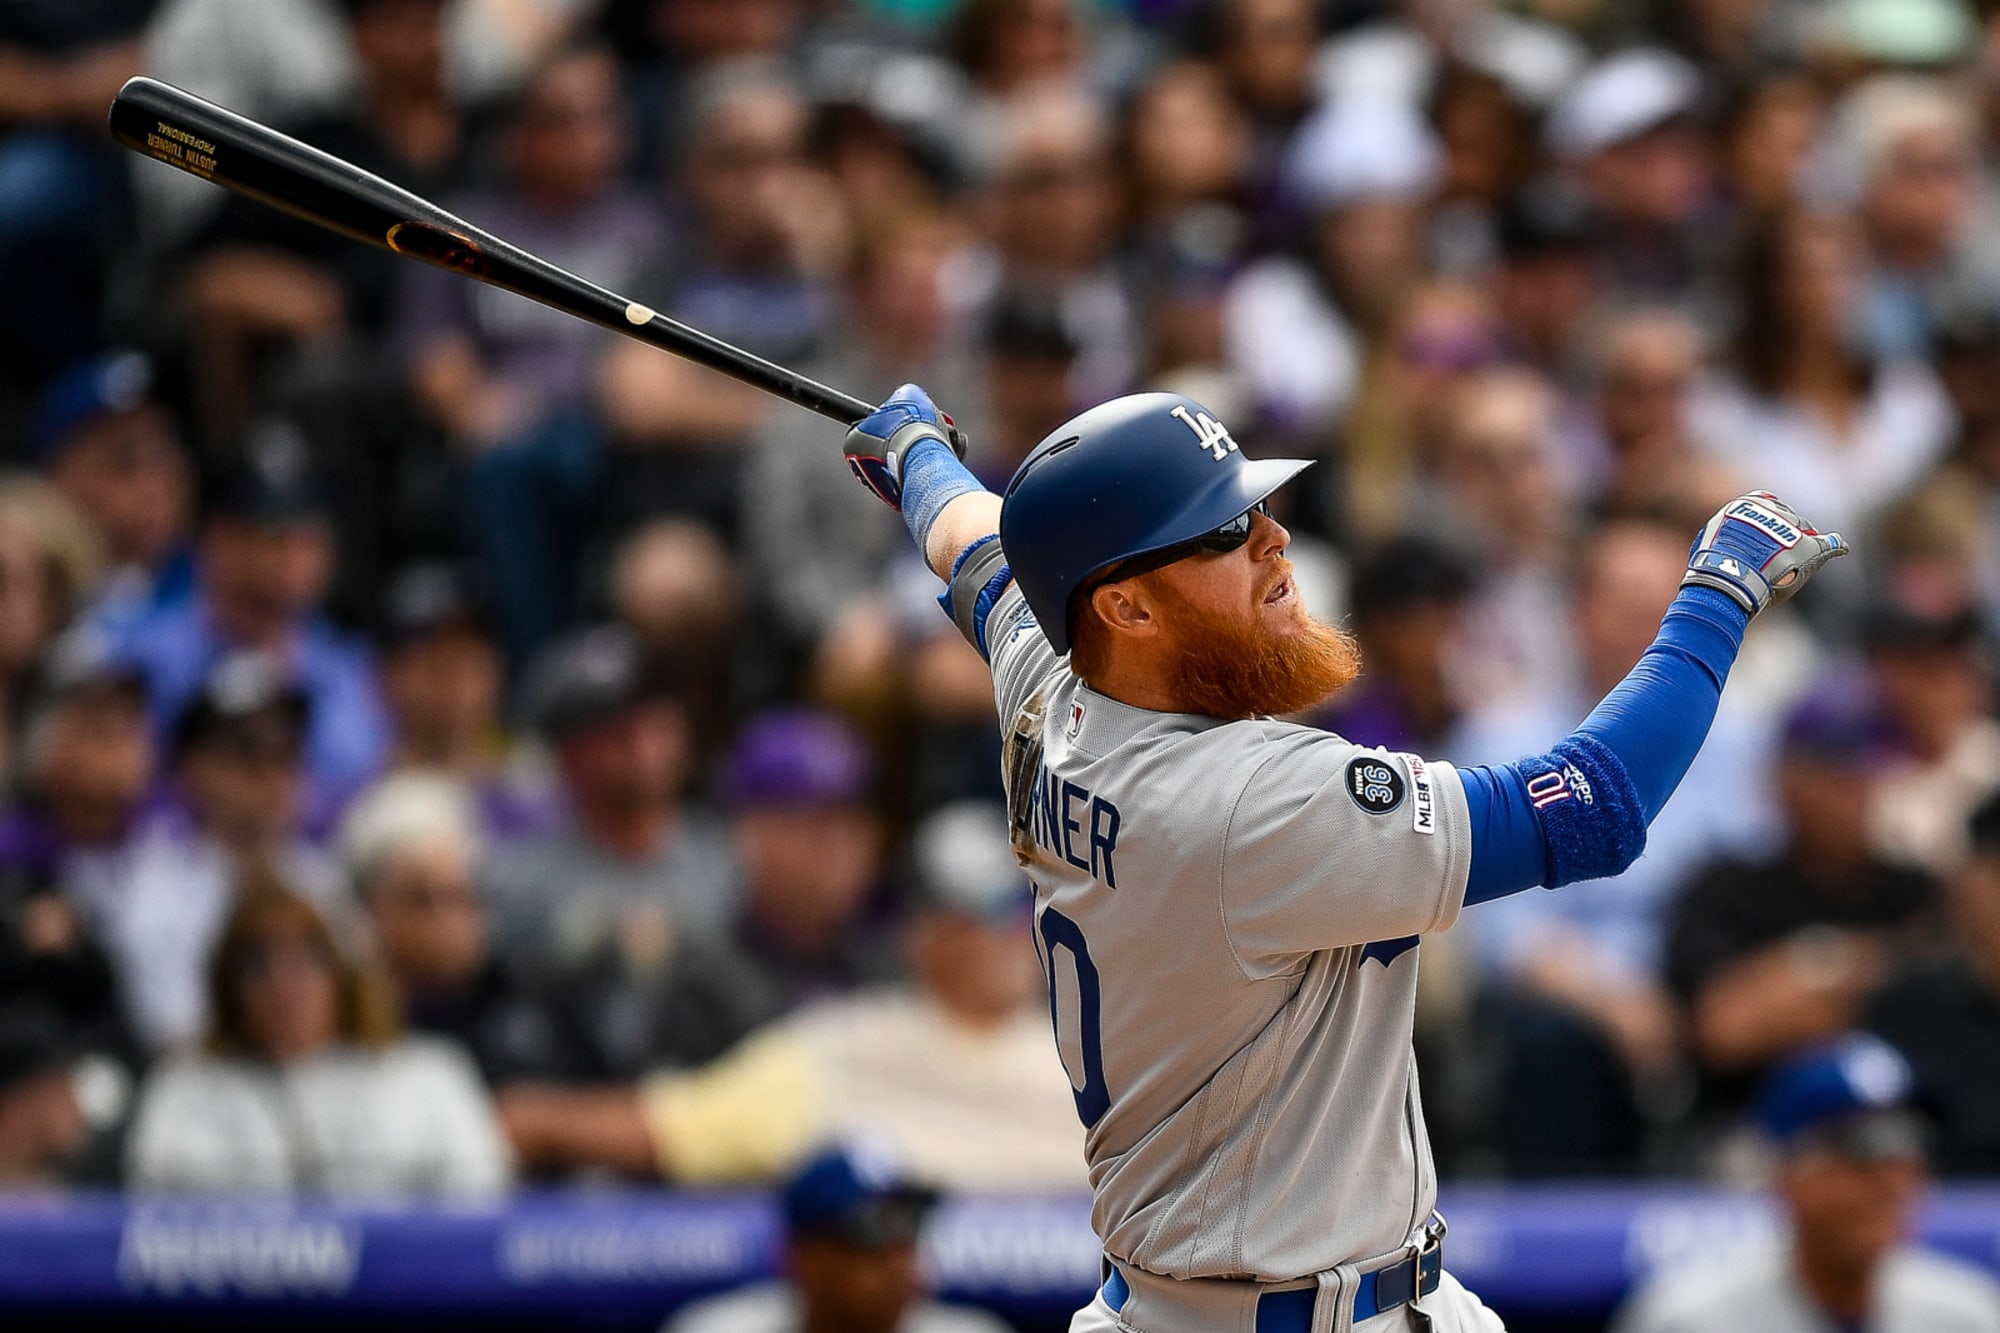 Los Angeles Dodgers can complete sweep with 10th straight home run